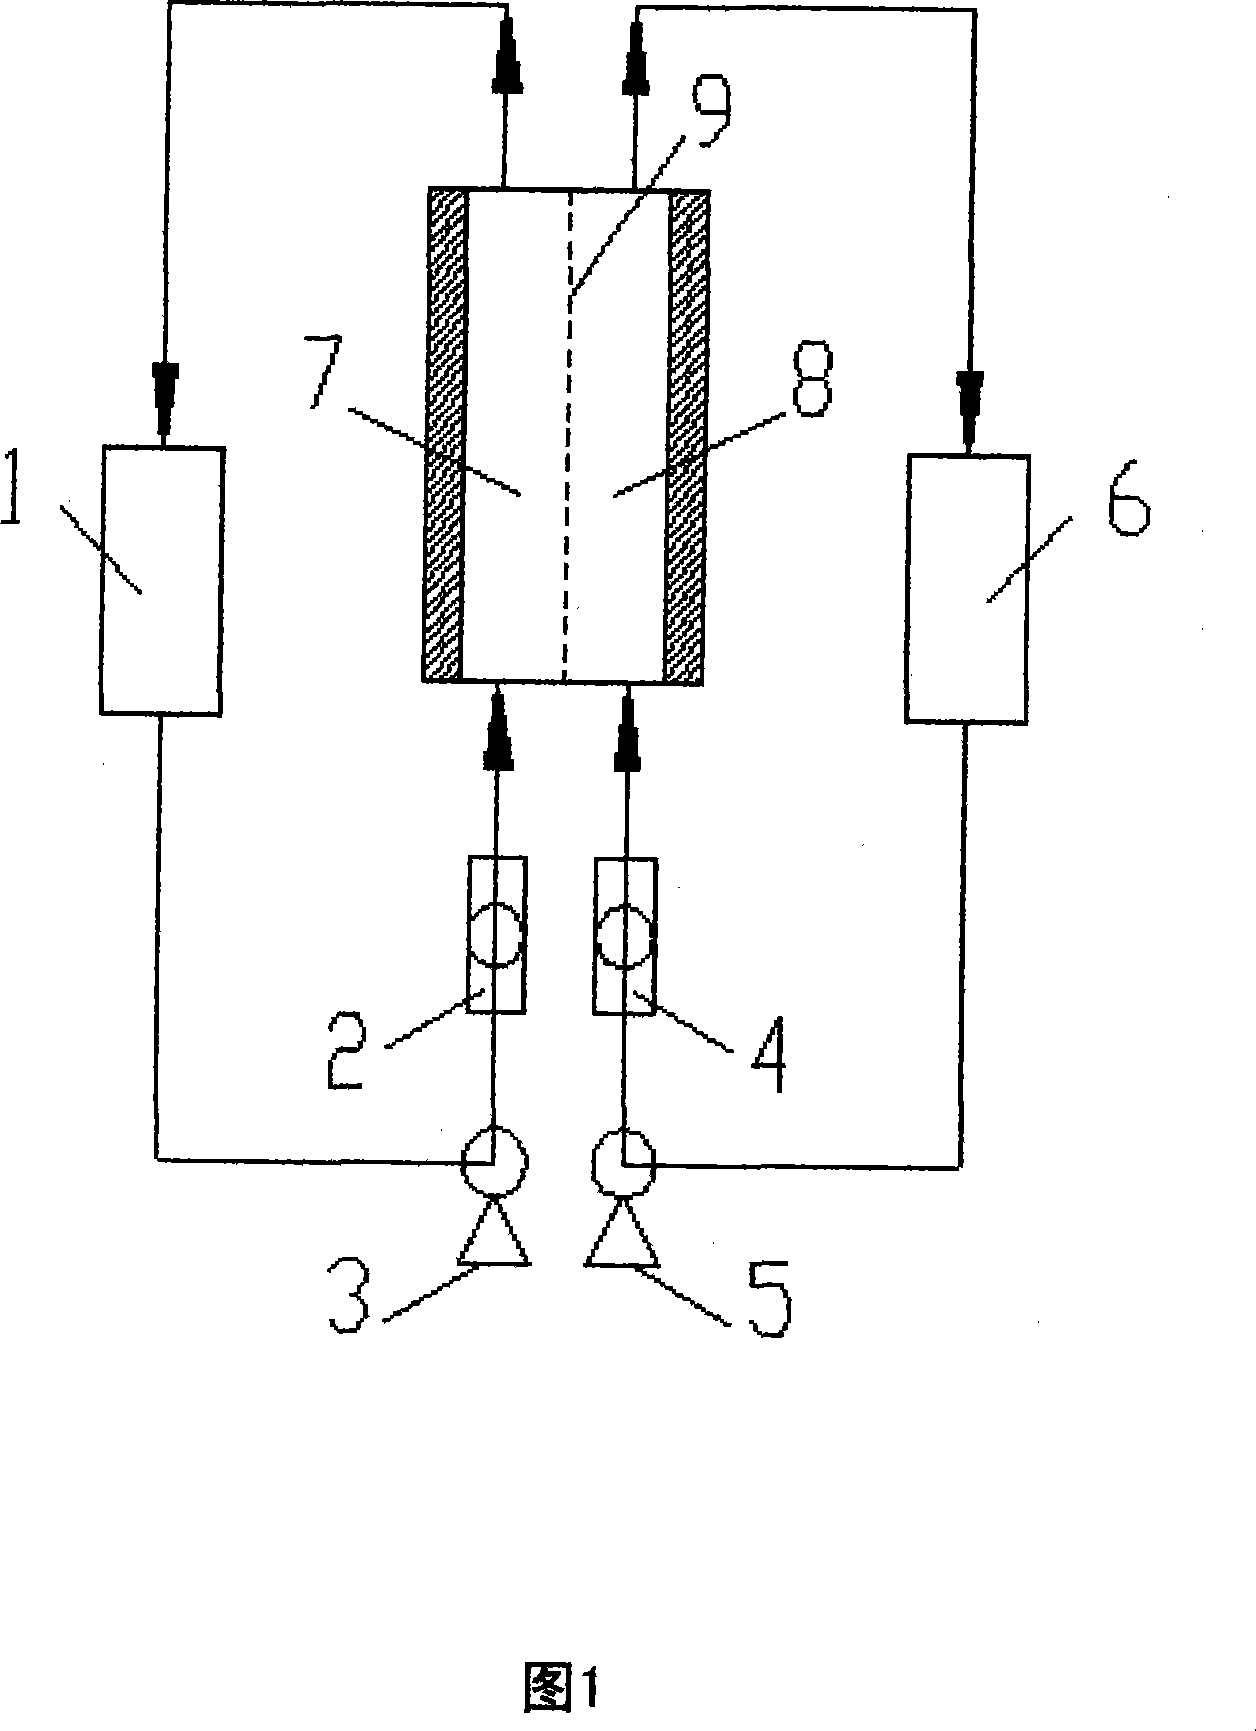 Method and device for preparing mannitol and potassium iodate by electrolysis in pairs